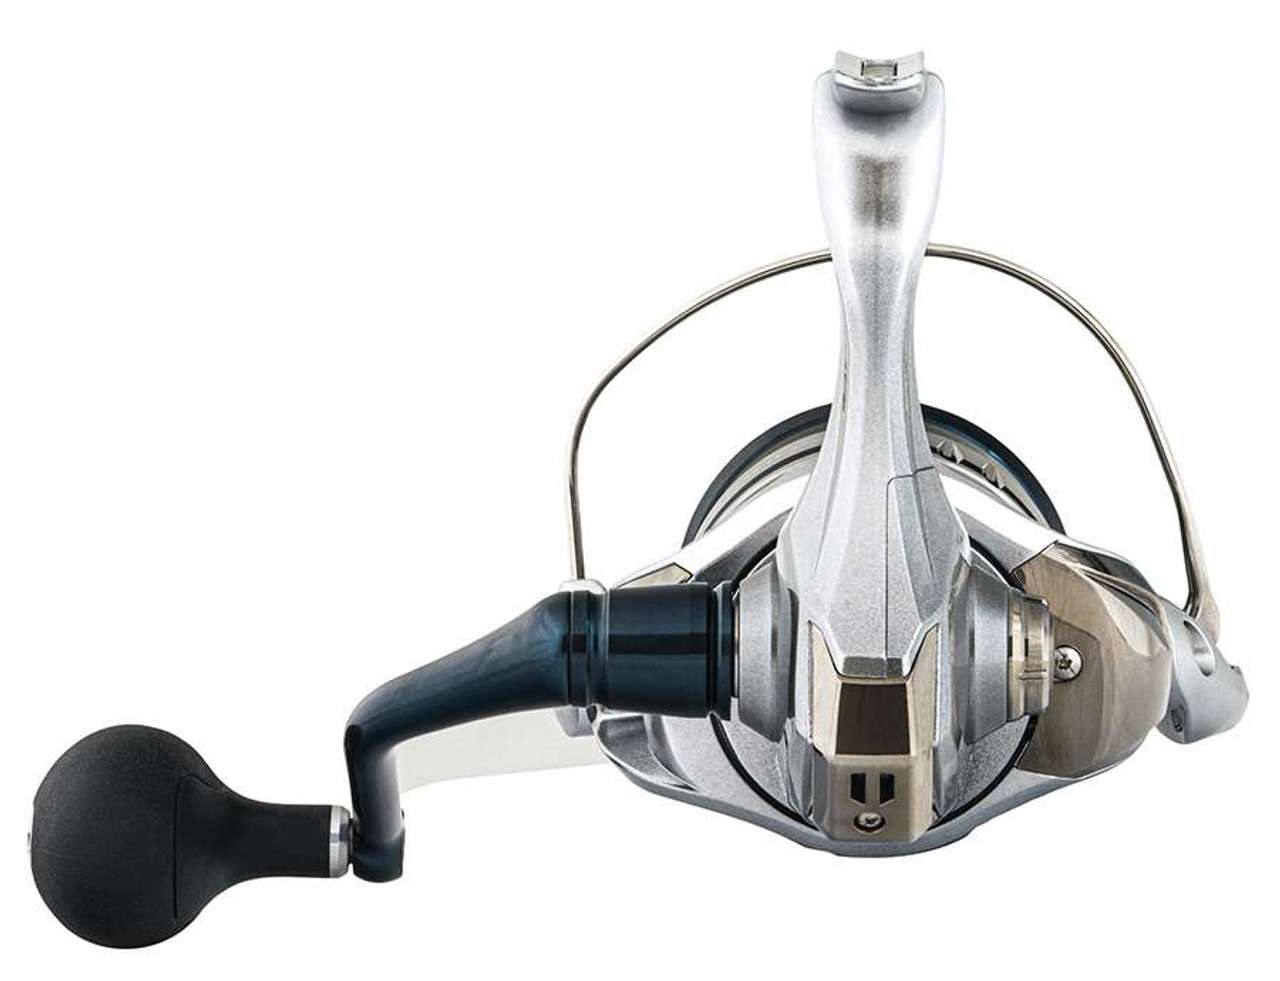 https://i.tackledirect.com/images/inset2/shimano-srg14000swaxg-saragosa-sw-a-spinning-reel.jpg